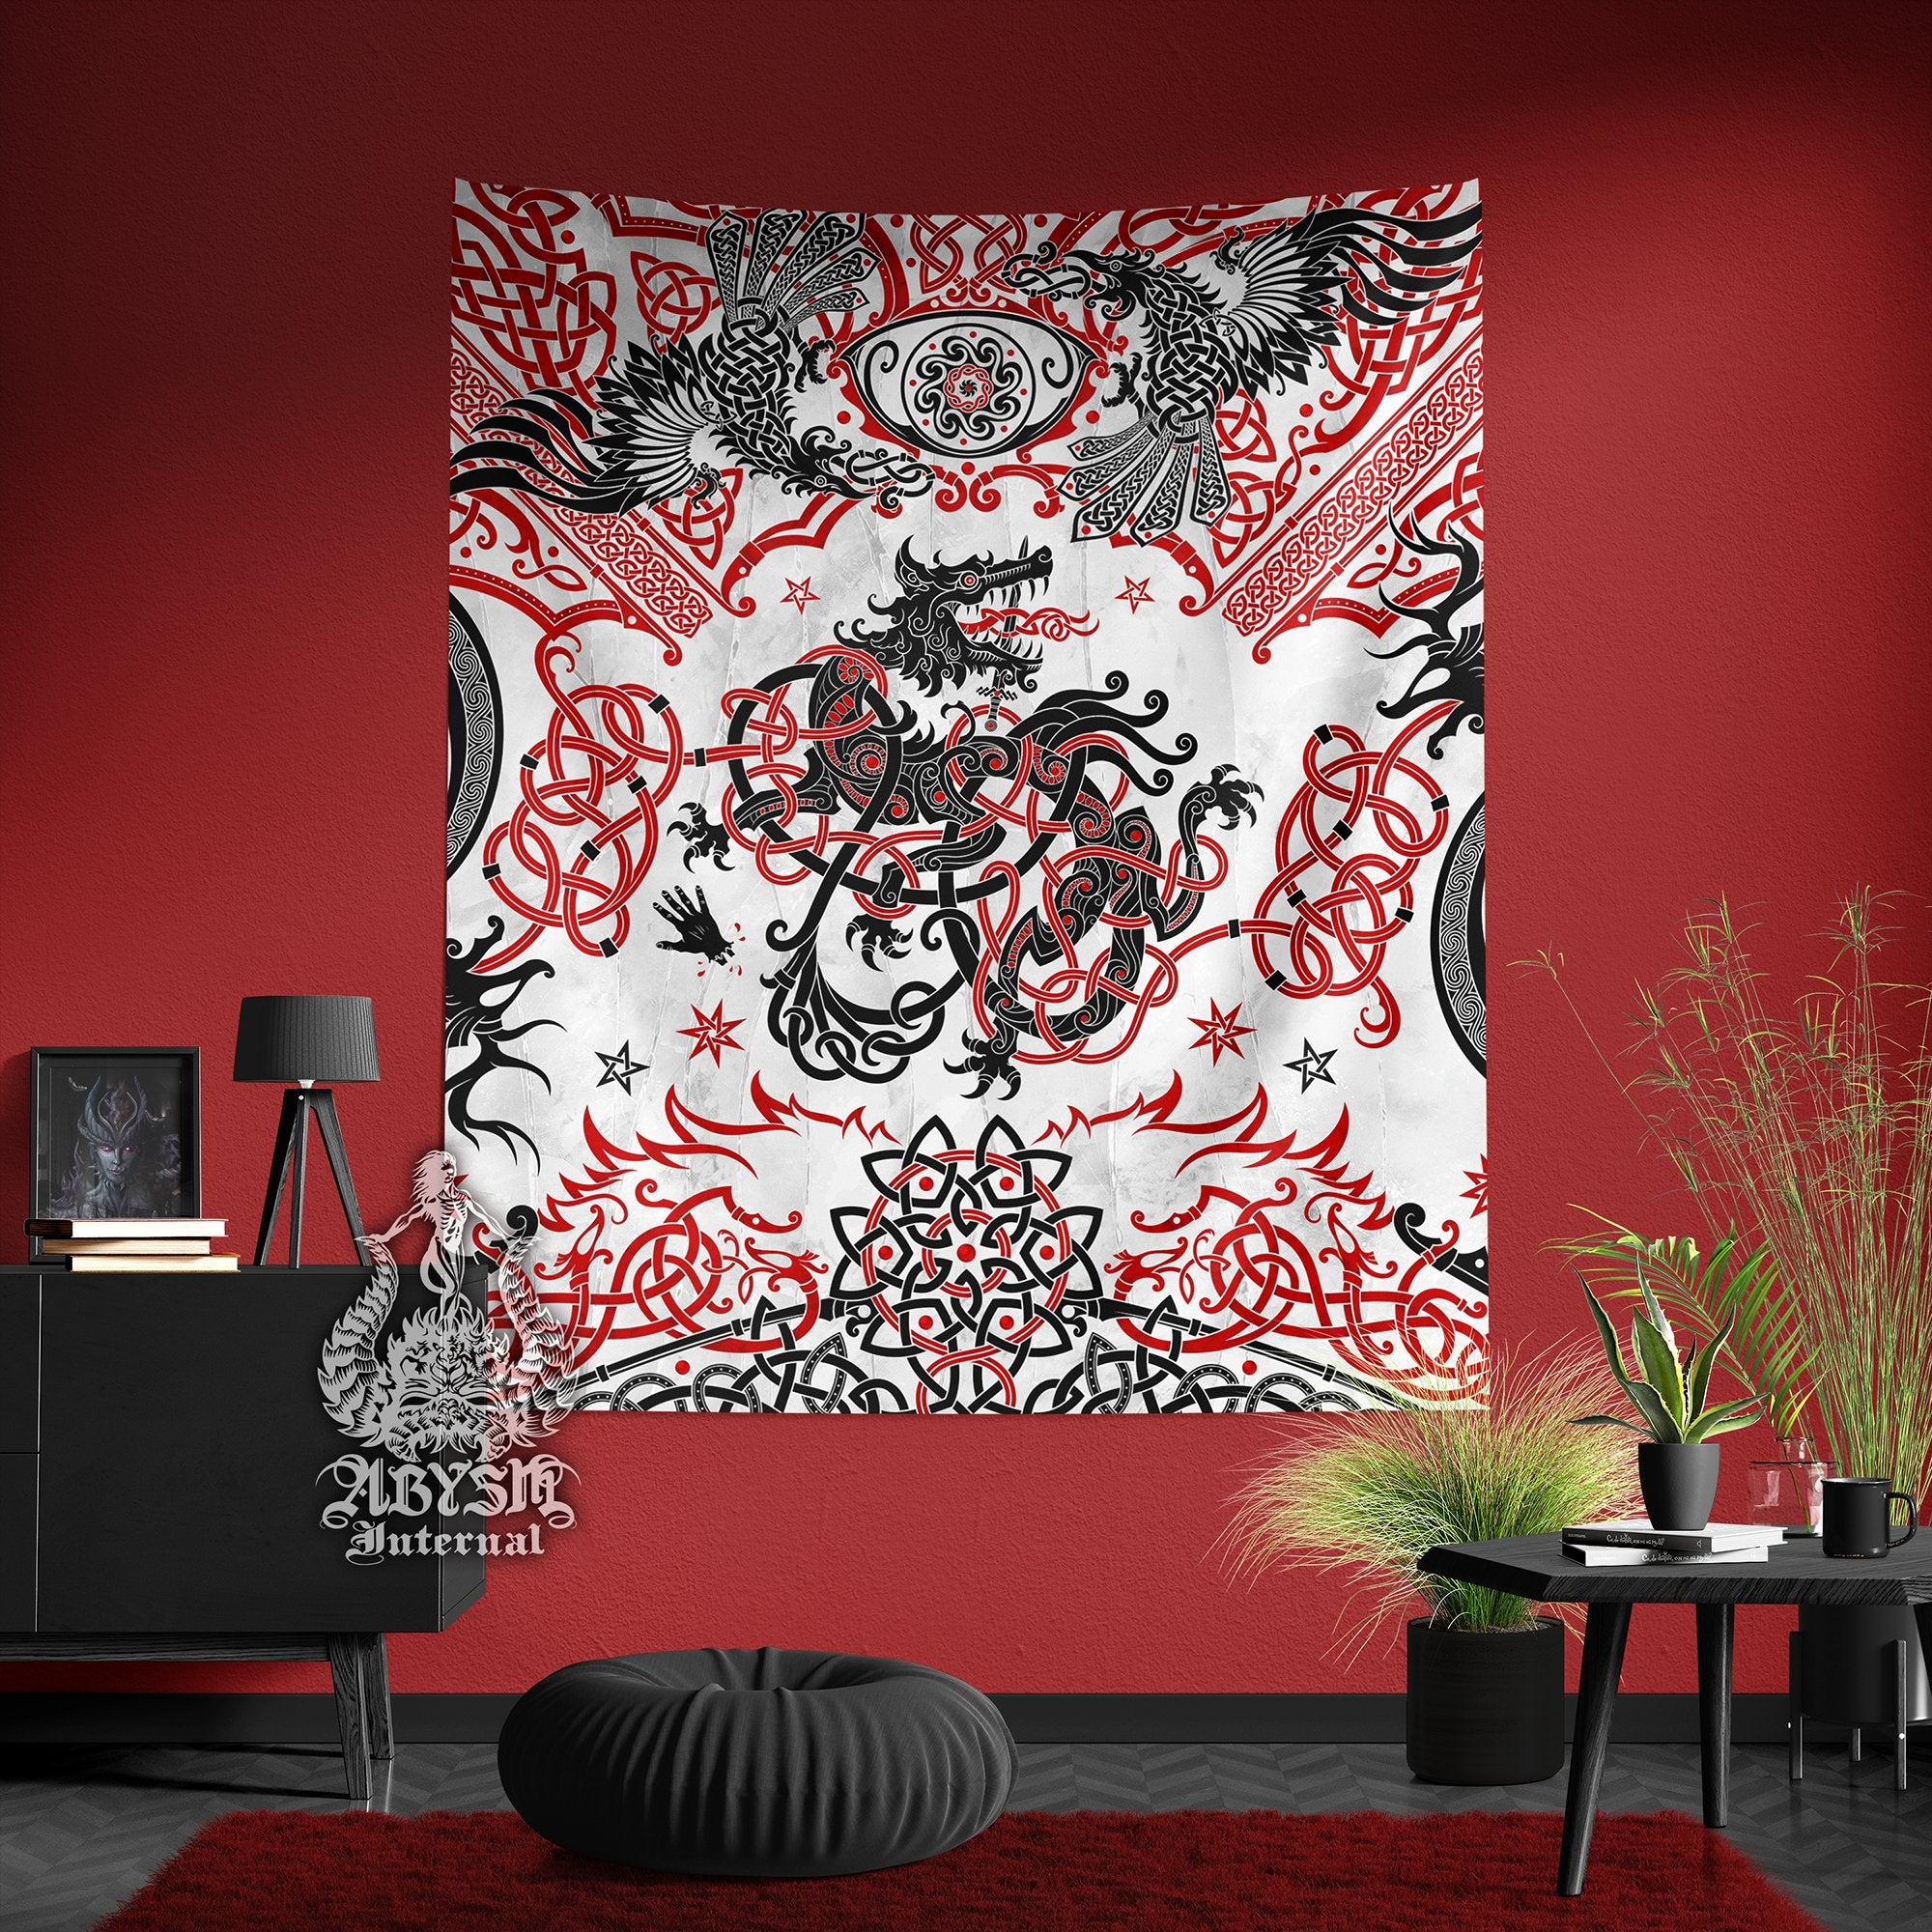 Nordic Art Tapestry, Norse Mythology Wall Hanging, Viking Home Decor, Fenrir Wolf, Vertical Print - Black Red White - Abysm Internal